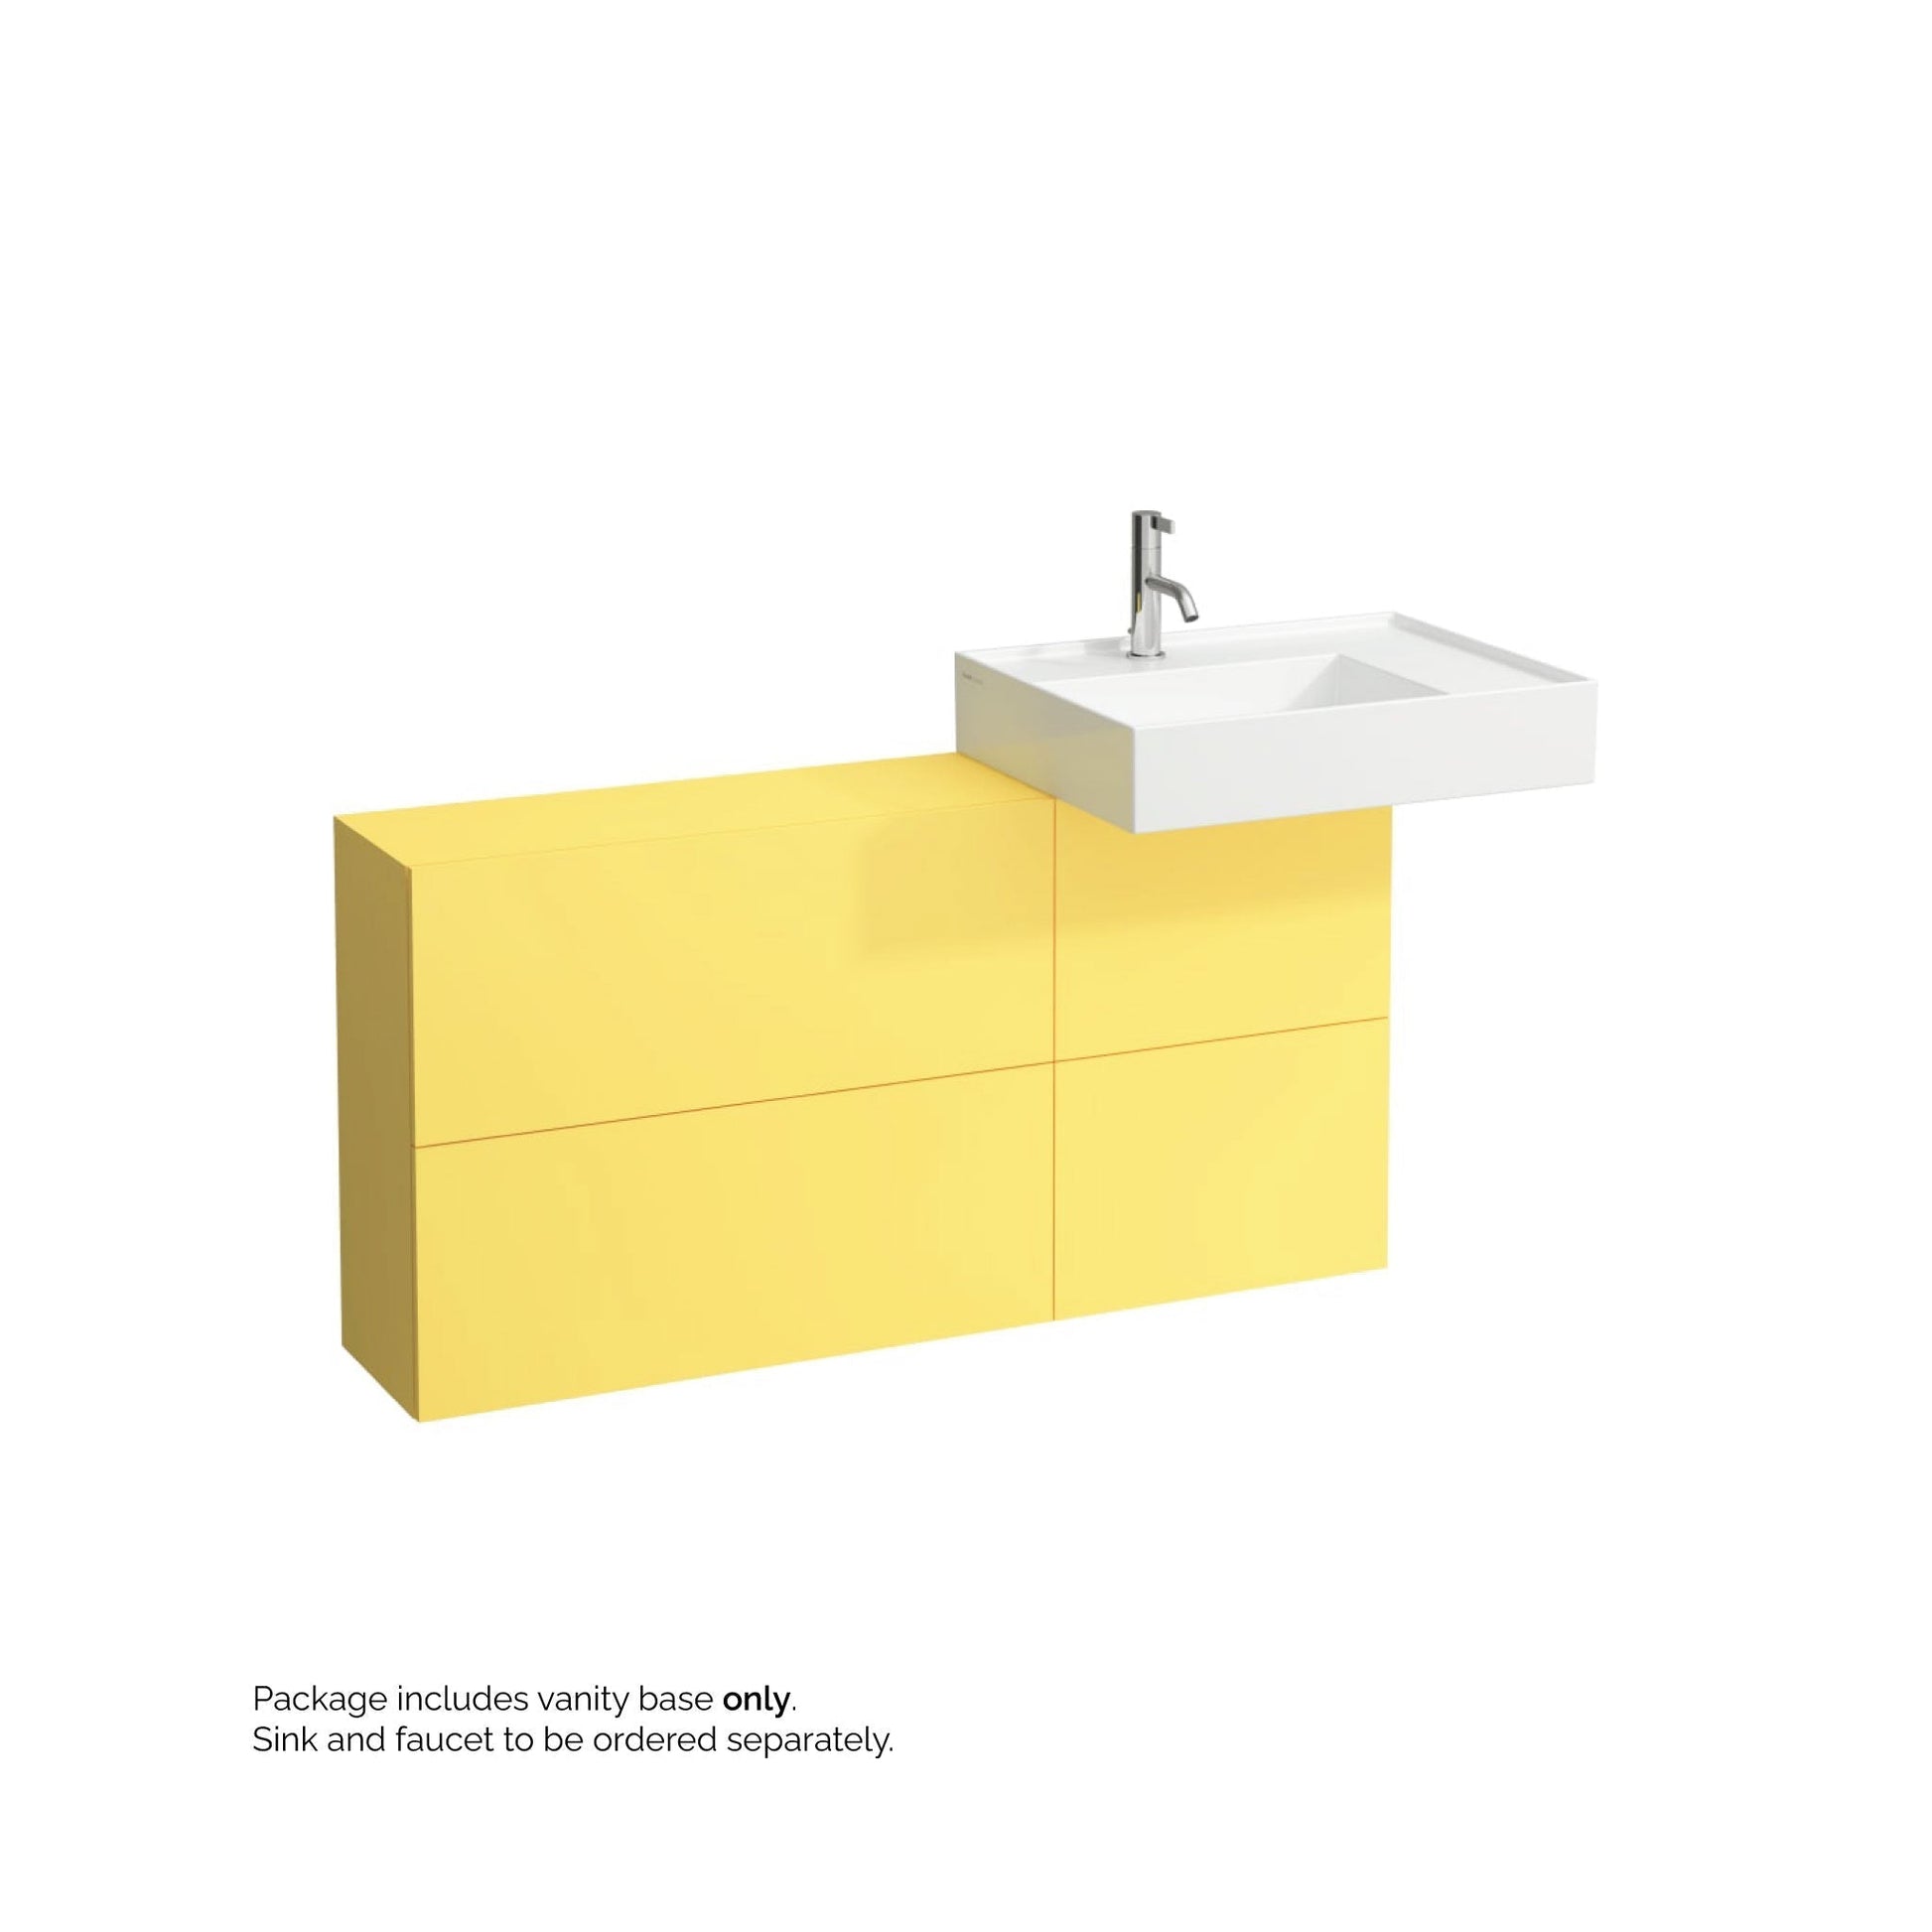 Laufen Kartell 47" 1-Door and 2-Flap Mustard Yellow Wall-Mounted Sideboard Vanity With Sink Placement on the Right